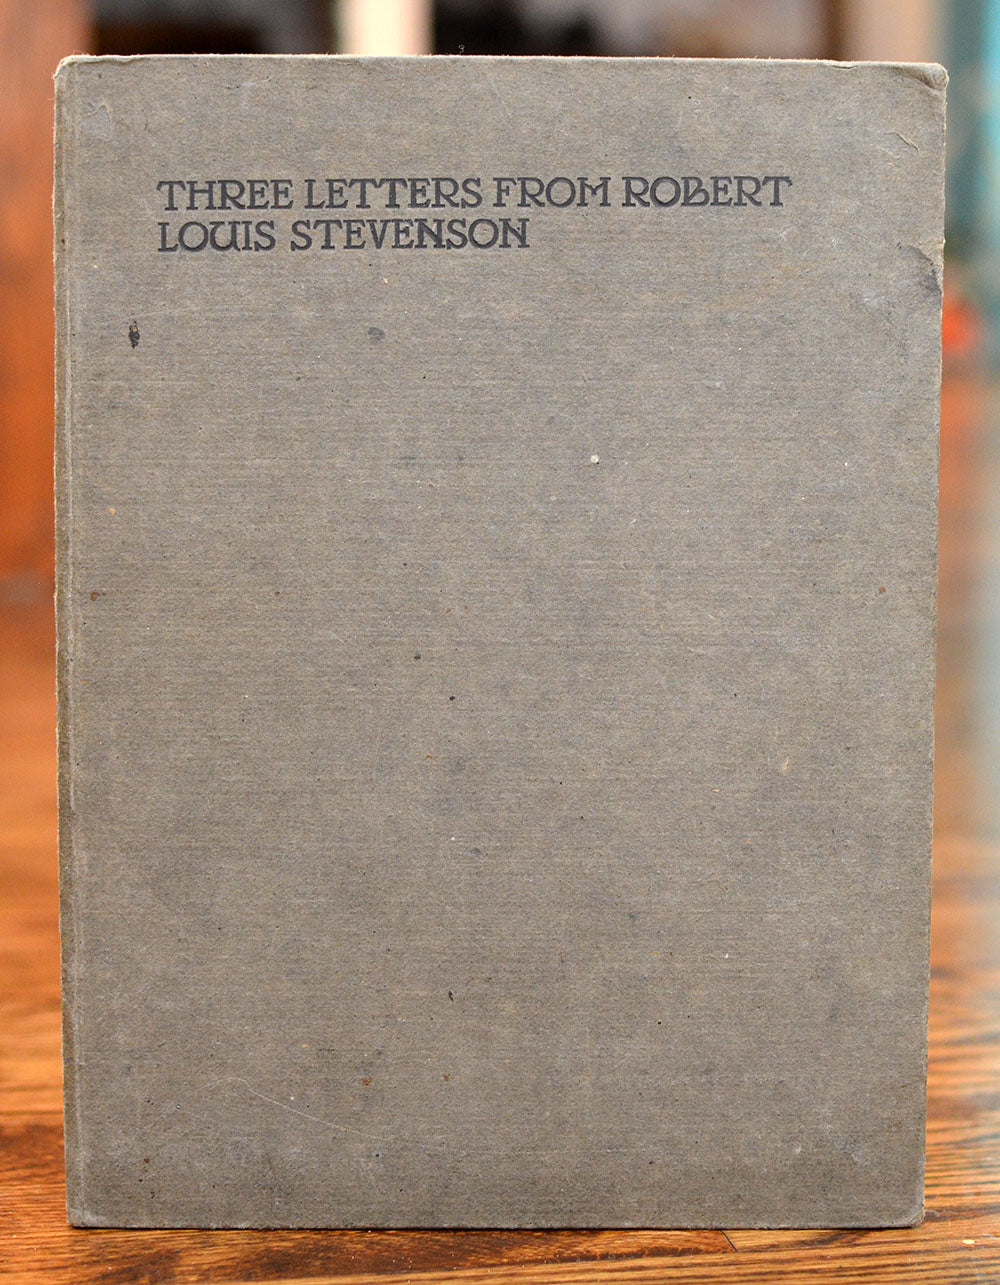 [Essex House Press | Limited to 60 Copies] Three Letters